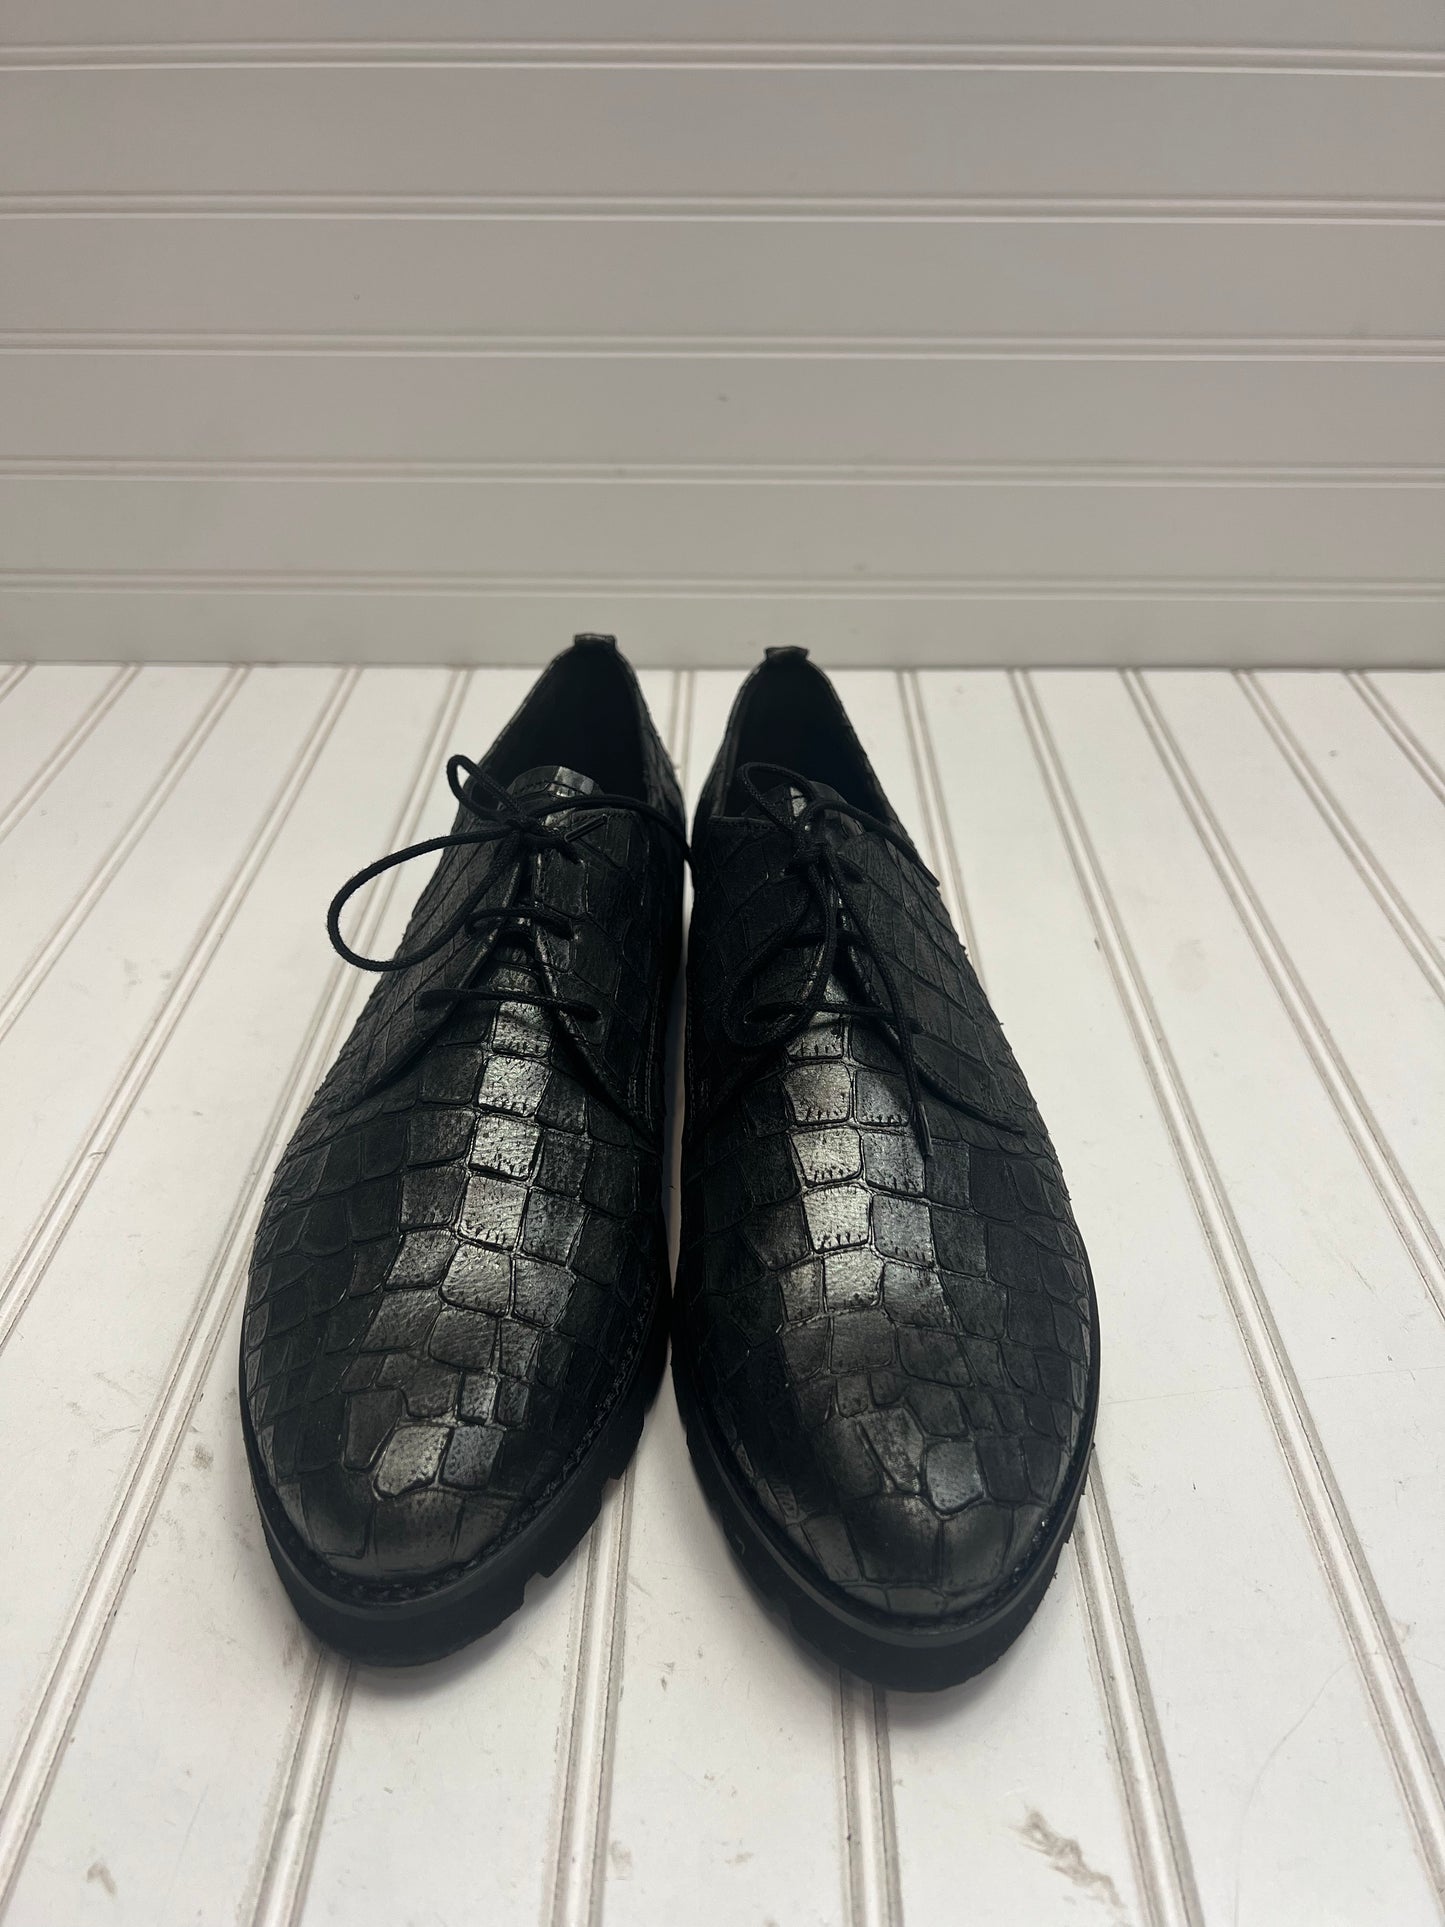 Shoes Heels Loafer Oxford By Cma  Size: 10